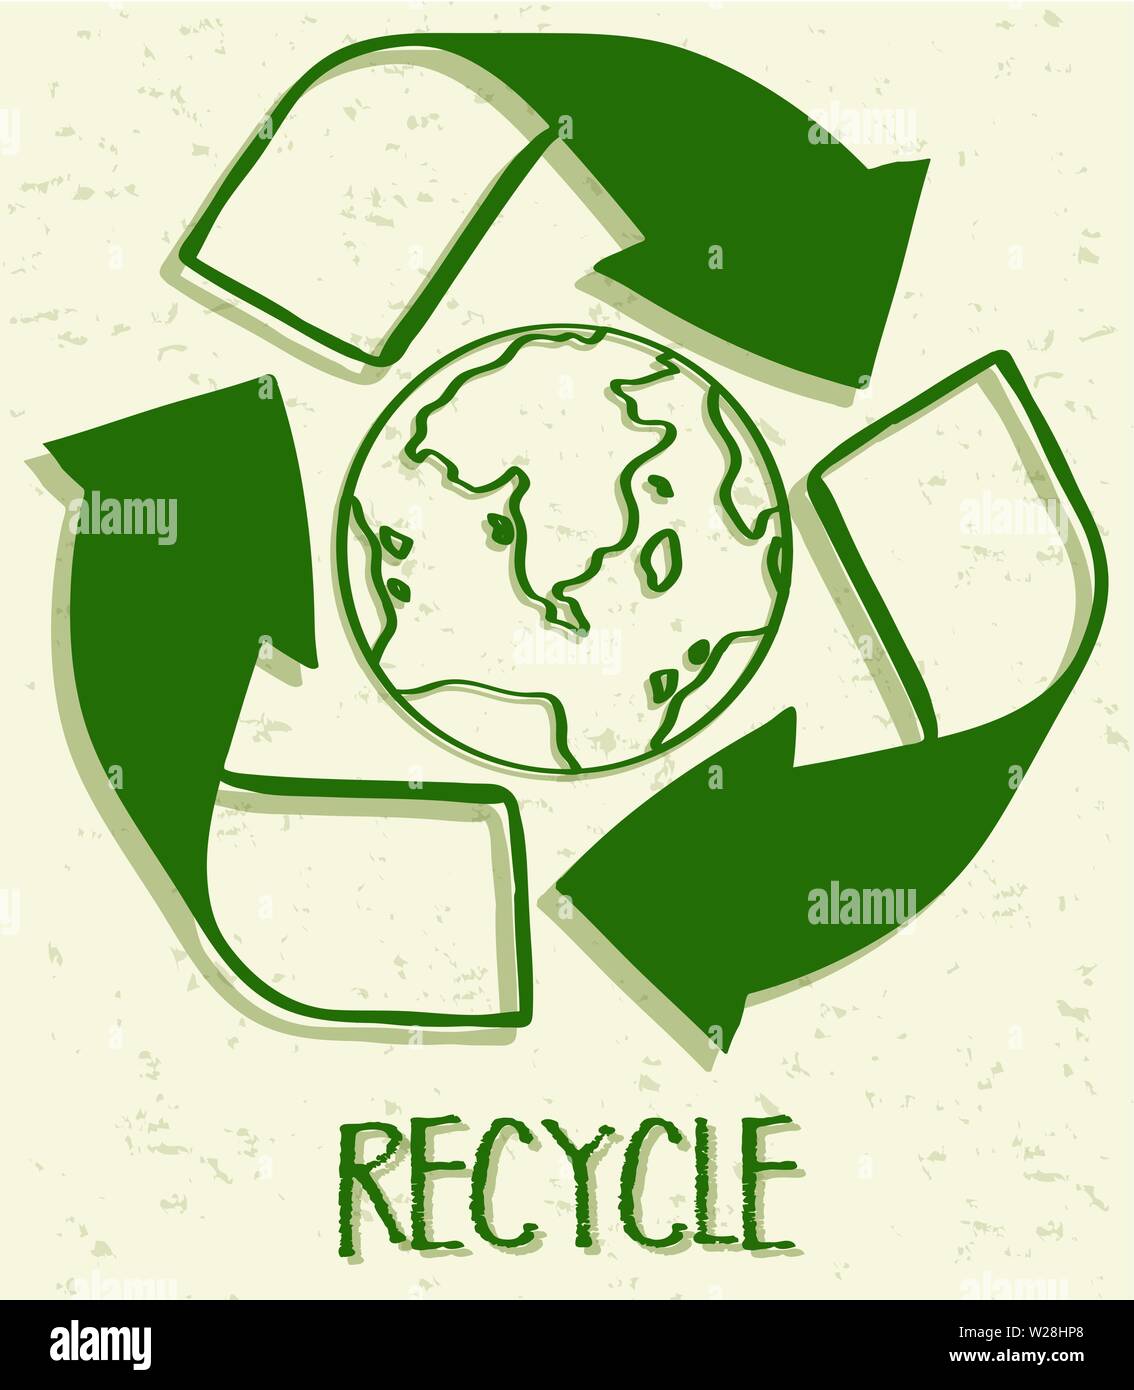 A recycle icon on white background illustration Stock Vector